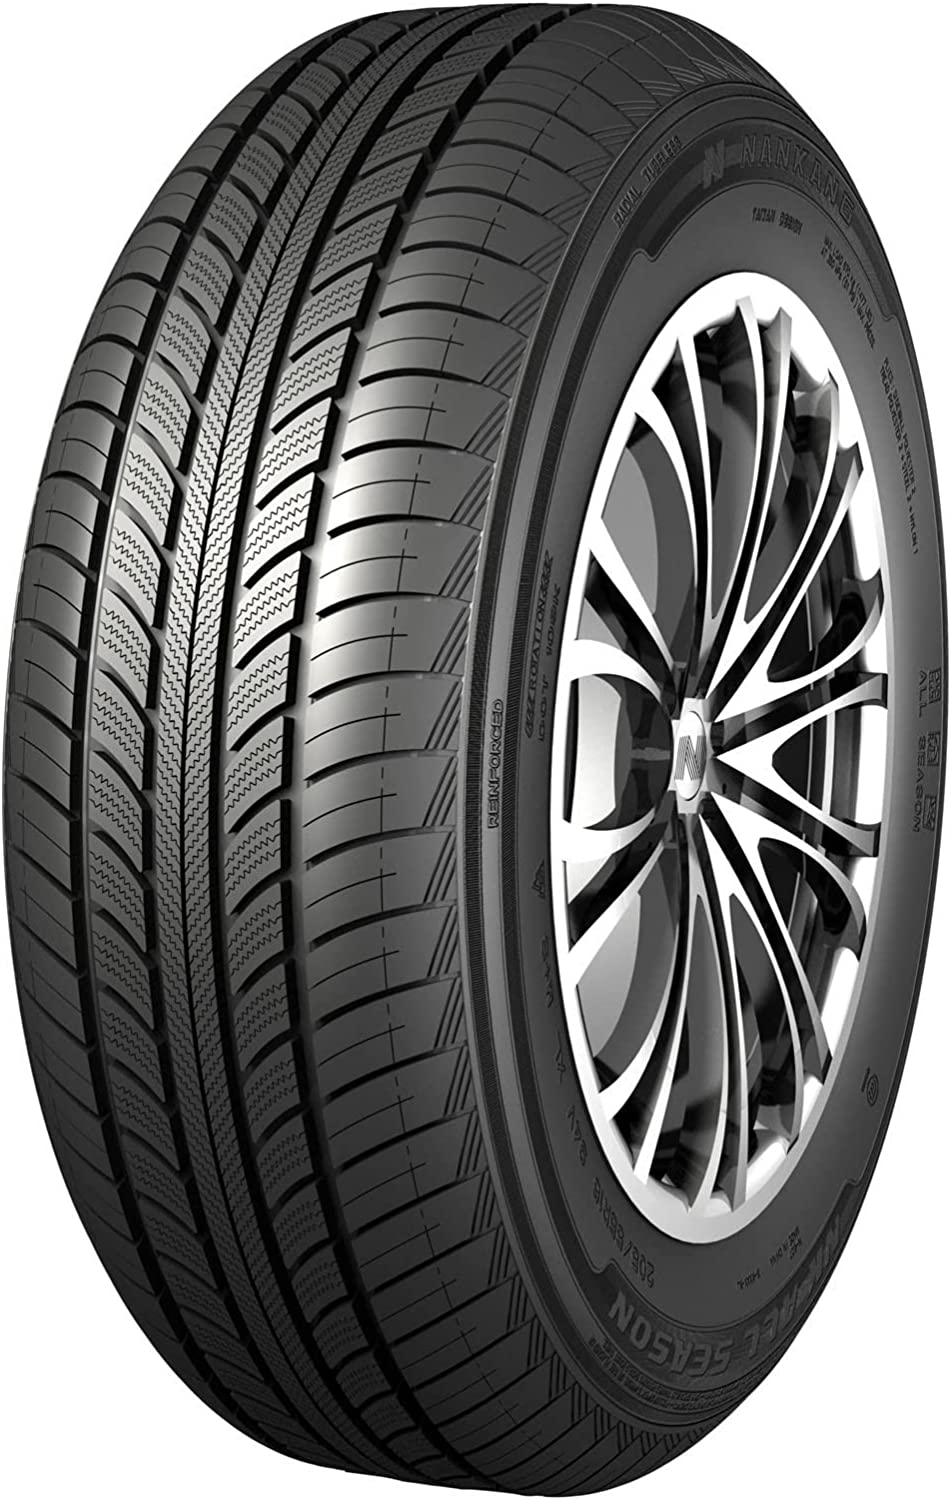 Gomme Nuove Nankang 135/80 R13 70T N607+ M+S pneumatici nuovi All Season